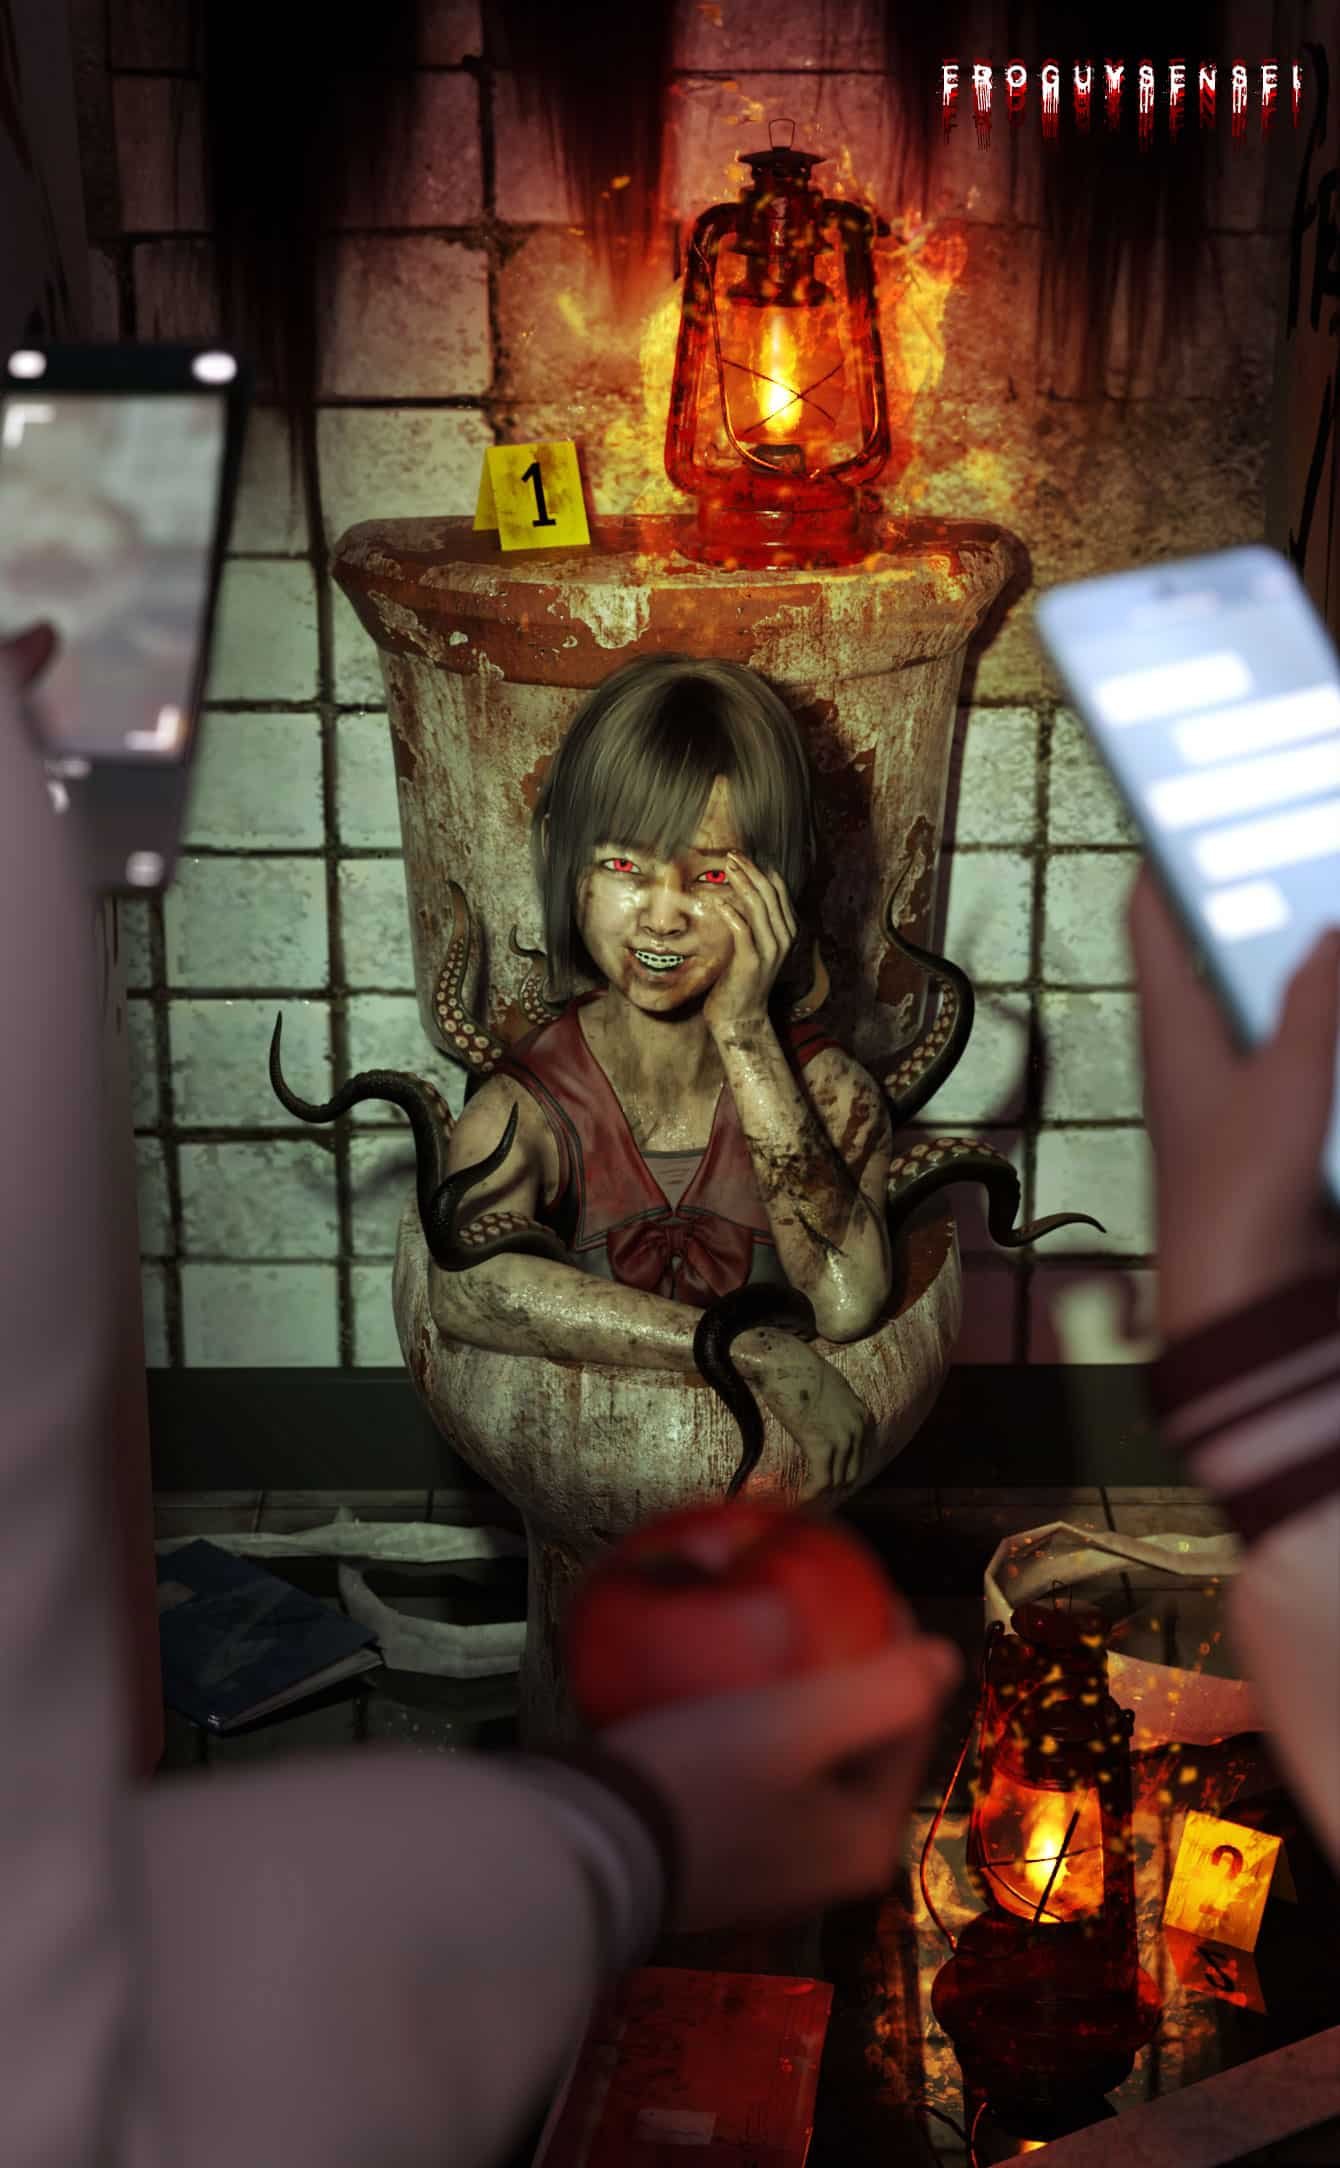 Hanako-san emerging from a dirty toilet